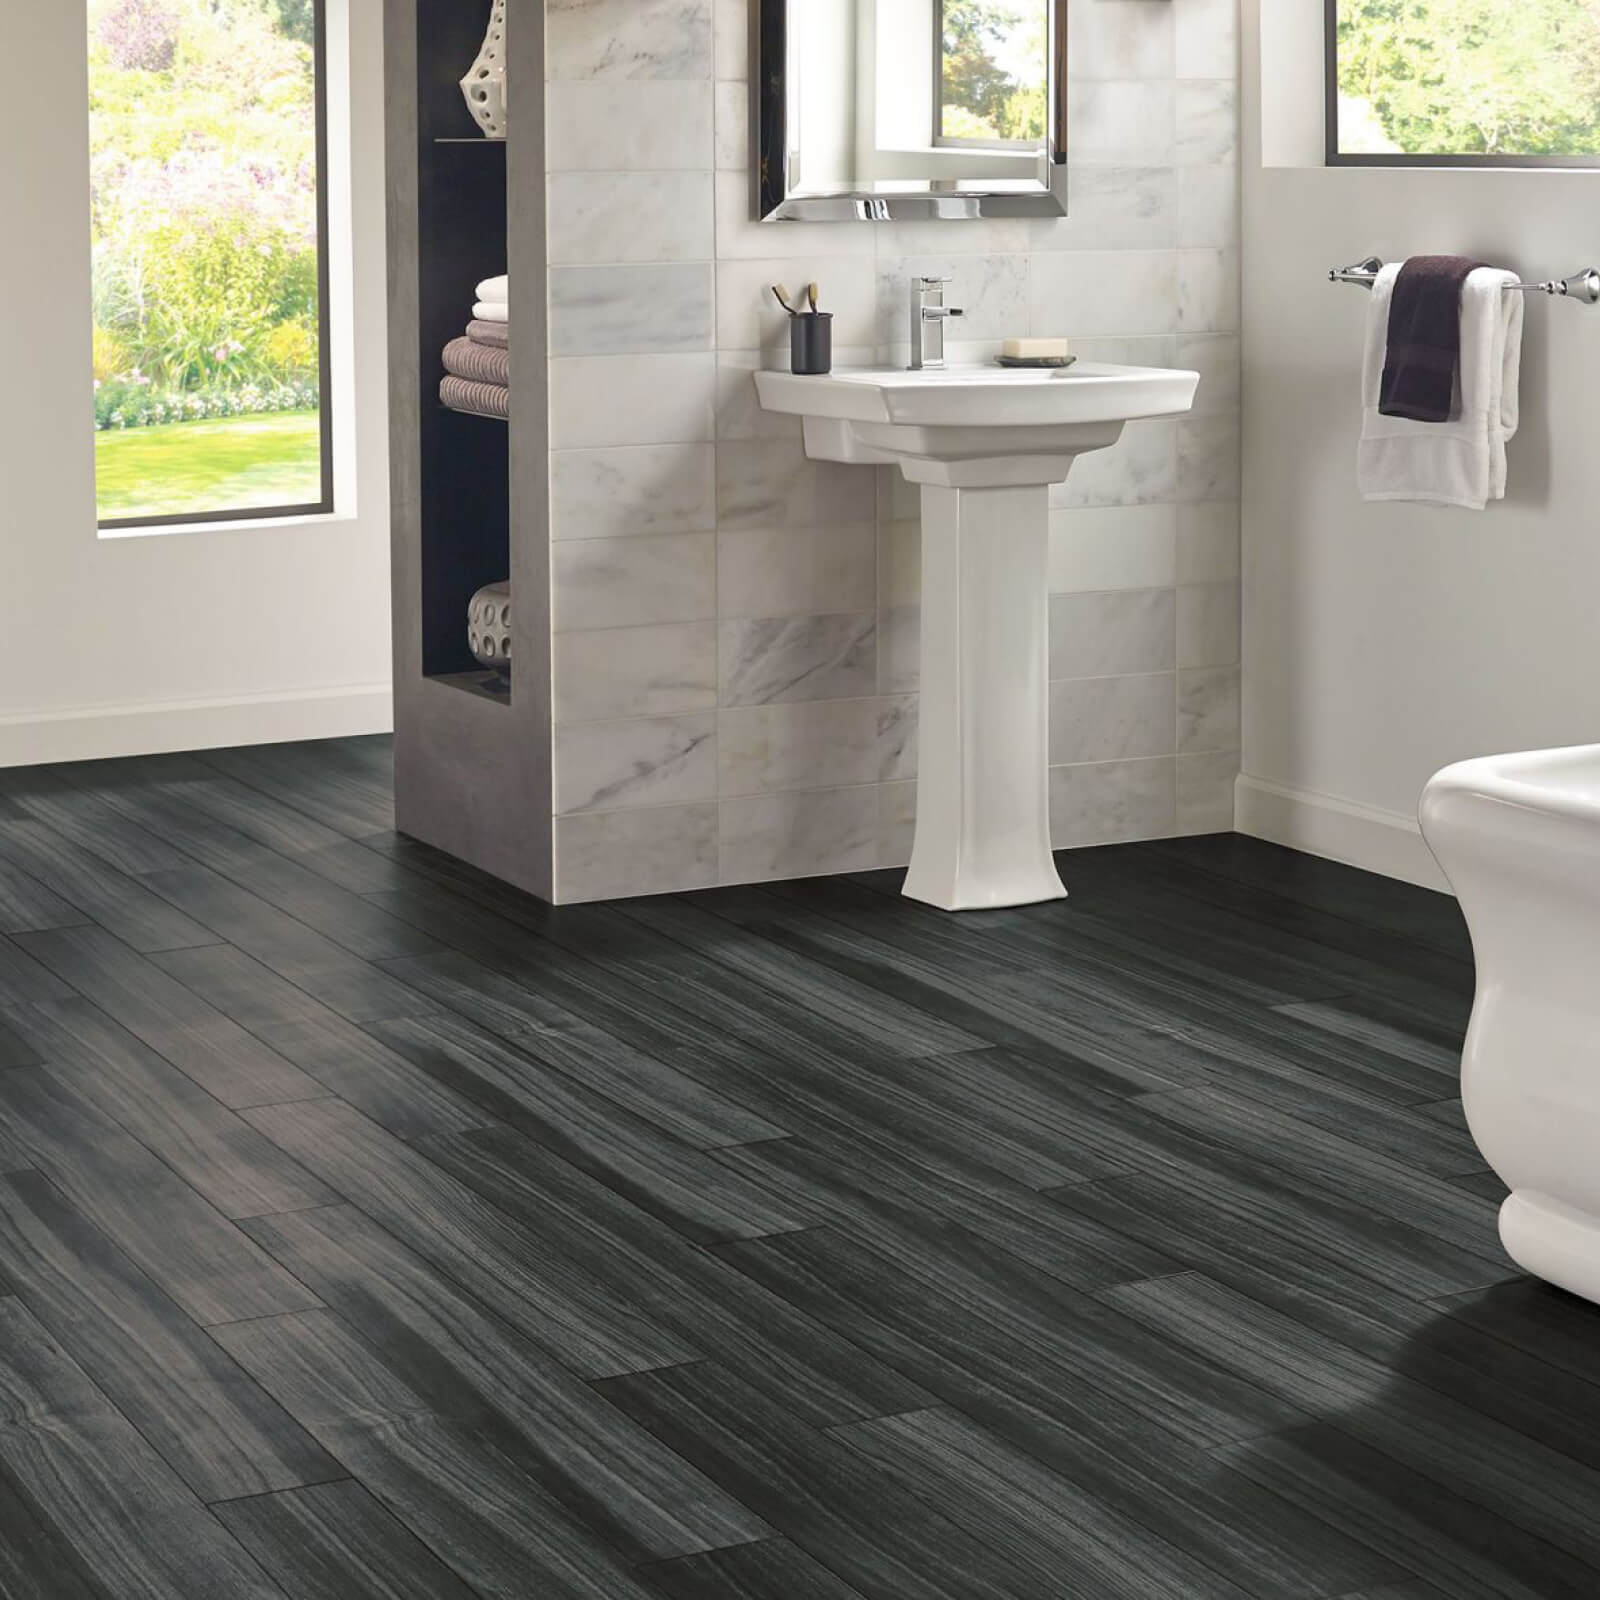 Stylish Vinyl Flooring Looks for Any Room in Your Home